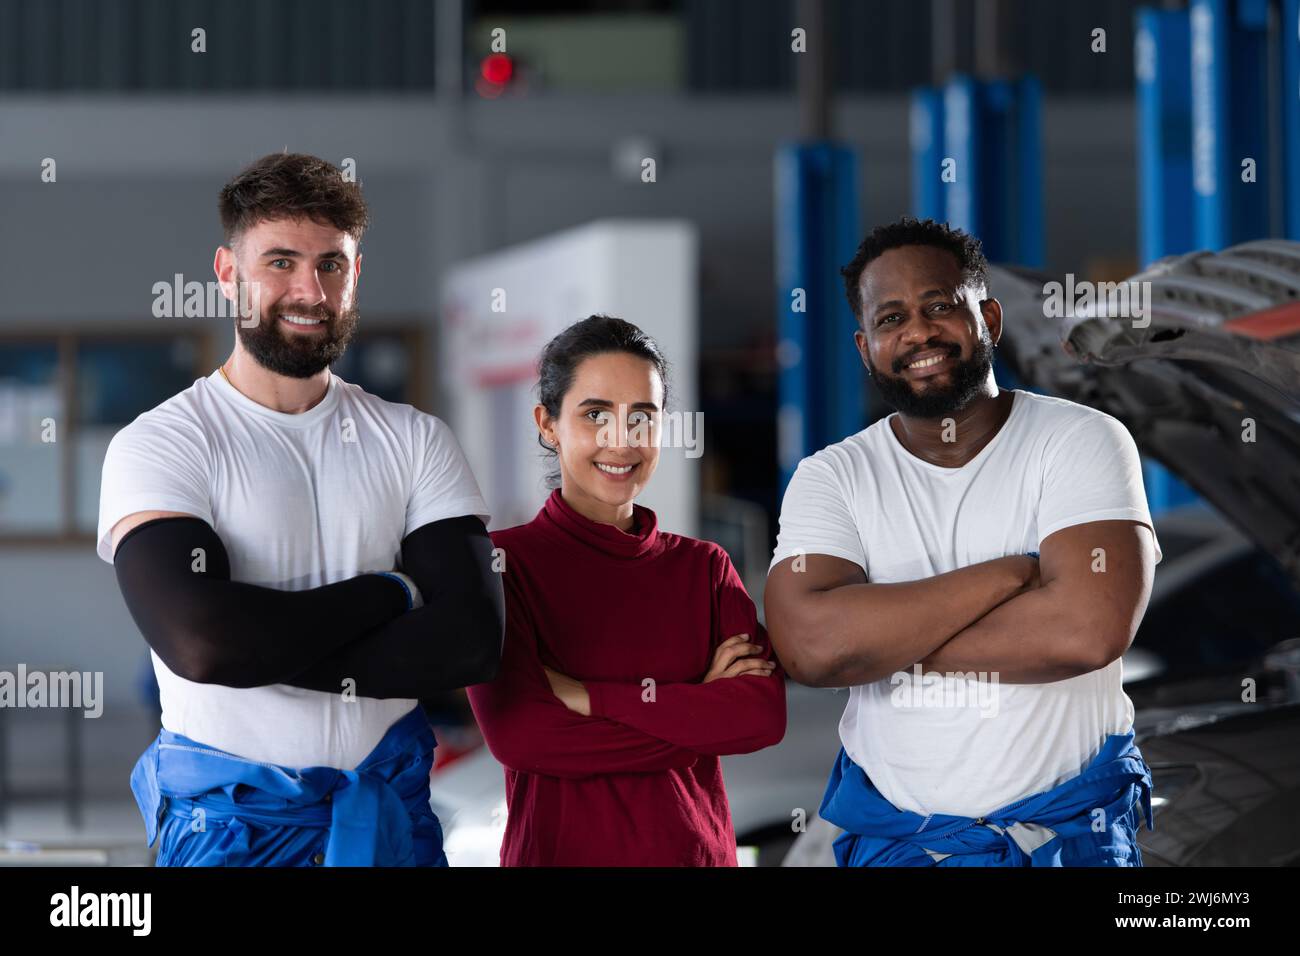 Portrait of two guy professional auto technician and a female customer standing in an auto repair shop with arms crossed Stock Photo